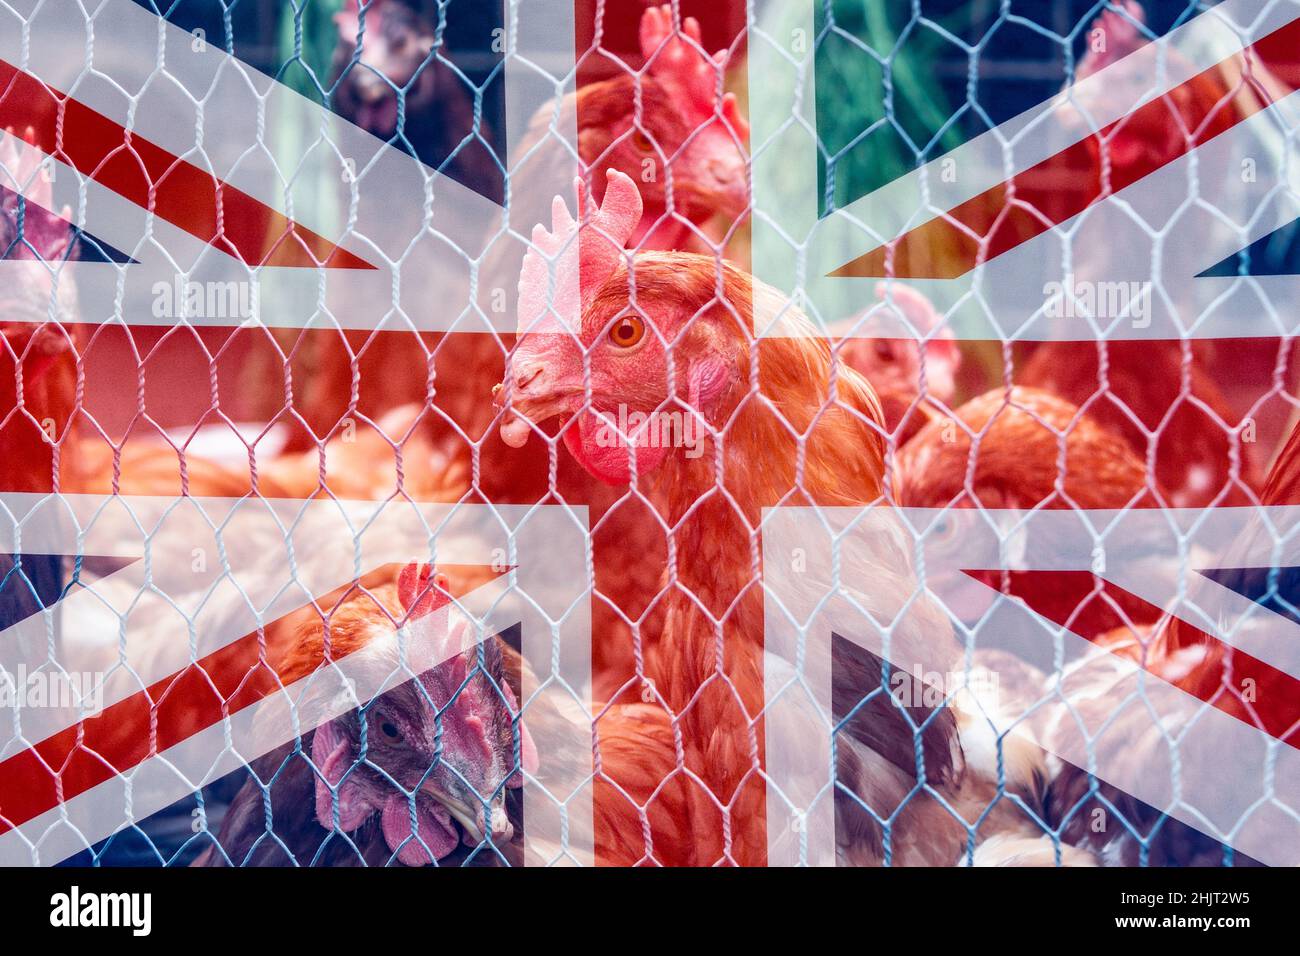 Poultry, chickens, hens outdoors behind chicken wire fence with UK flag overlayed. Brexit, free range, uk, intensive farming, poultry workers, concept Stock Photo